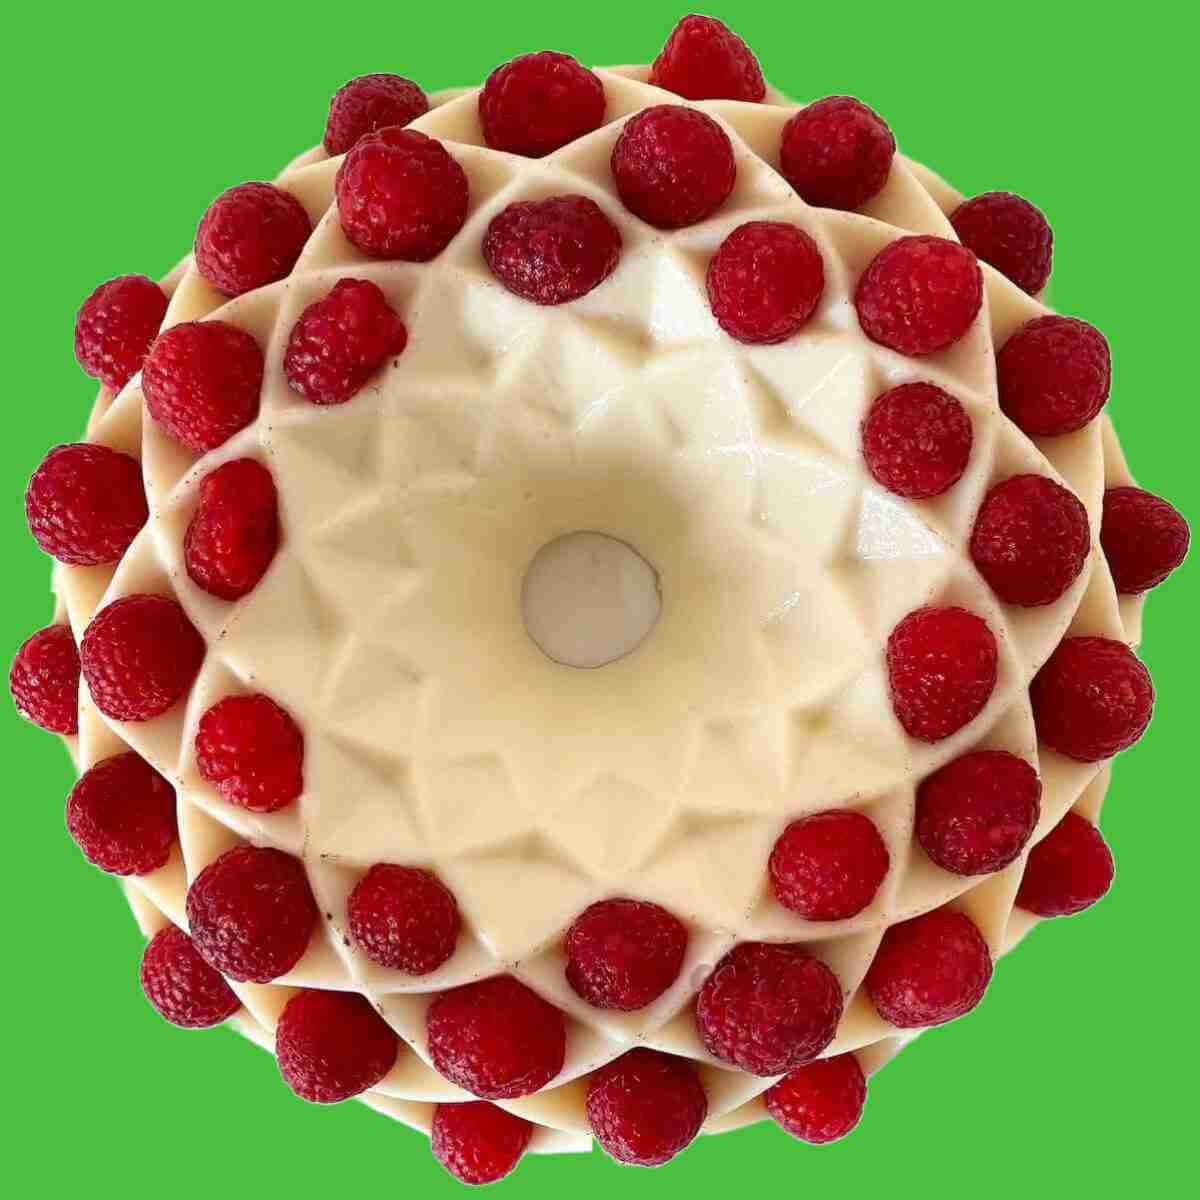 Milk jello made in a bundt cake pan and topped with raspberries.